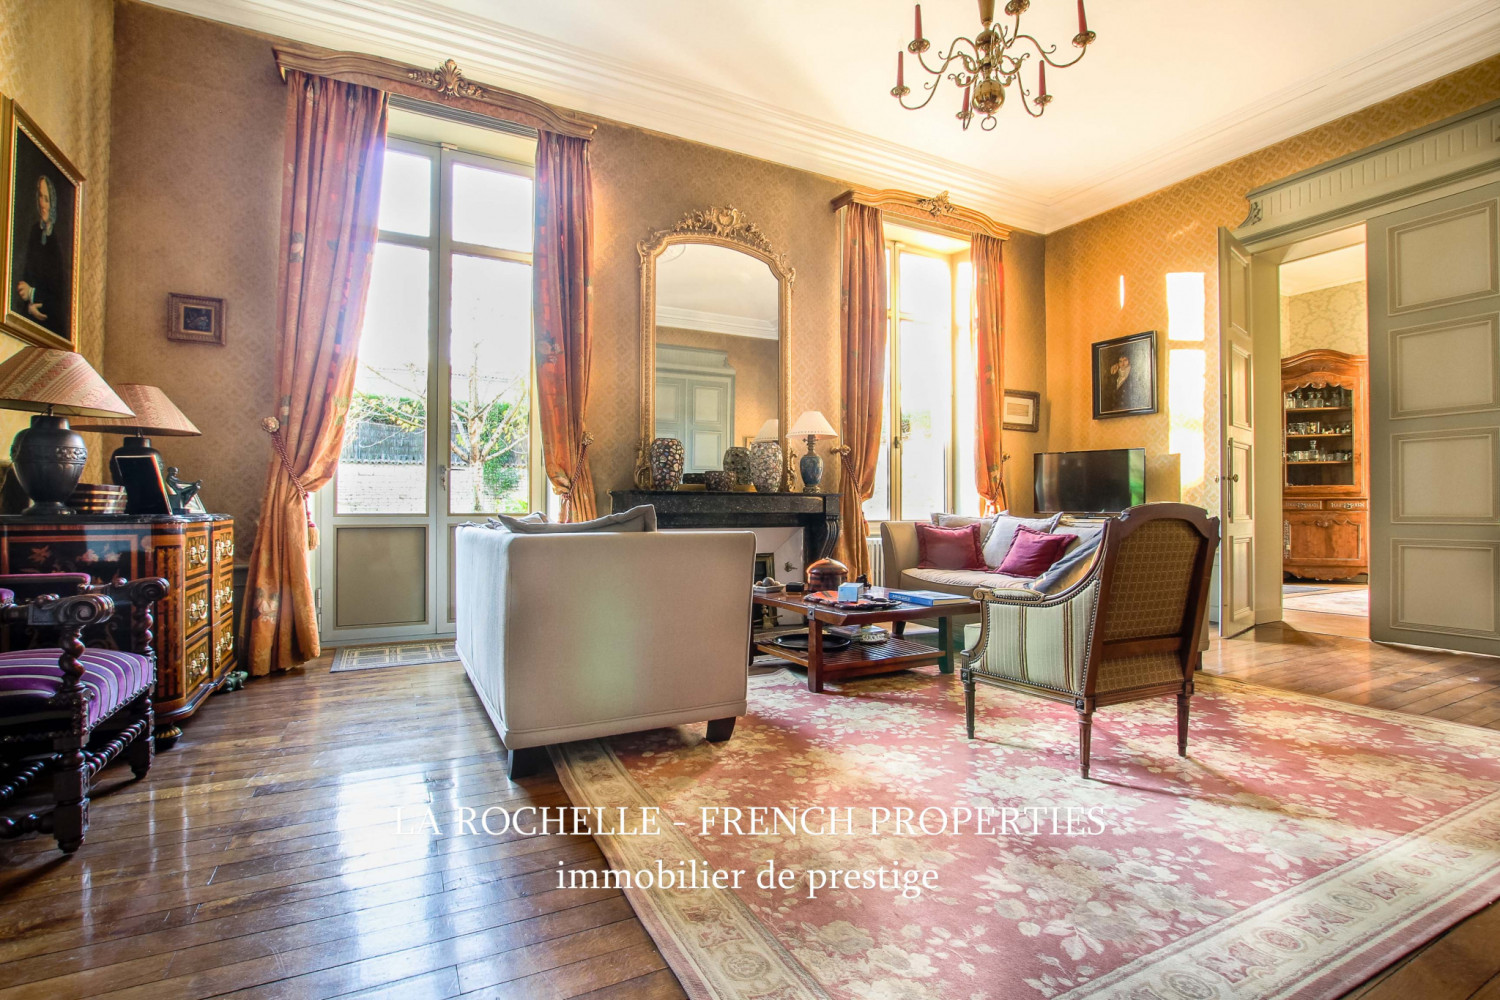 our selection of houses for sale in La Rochelle